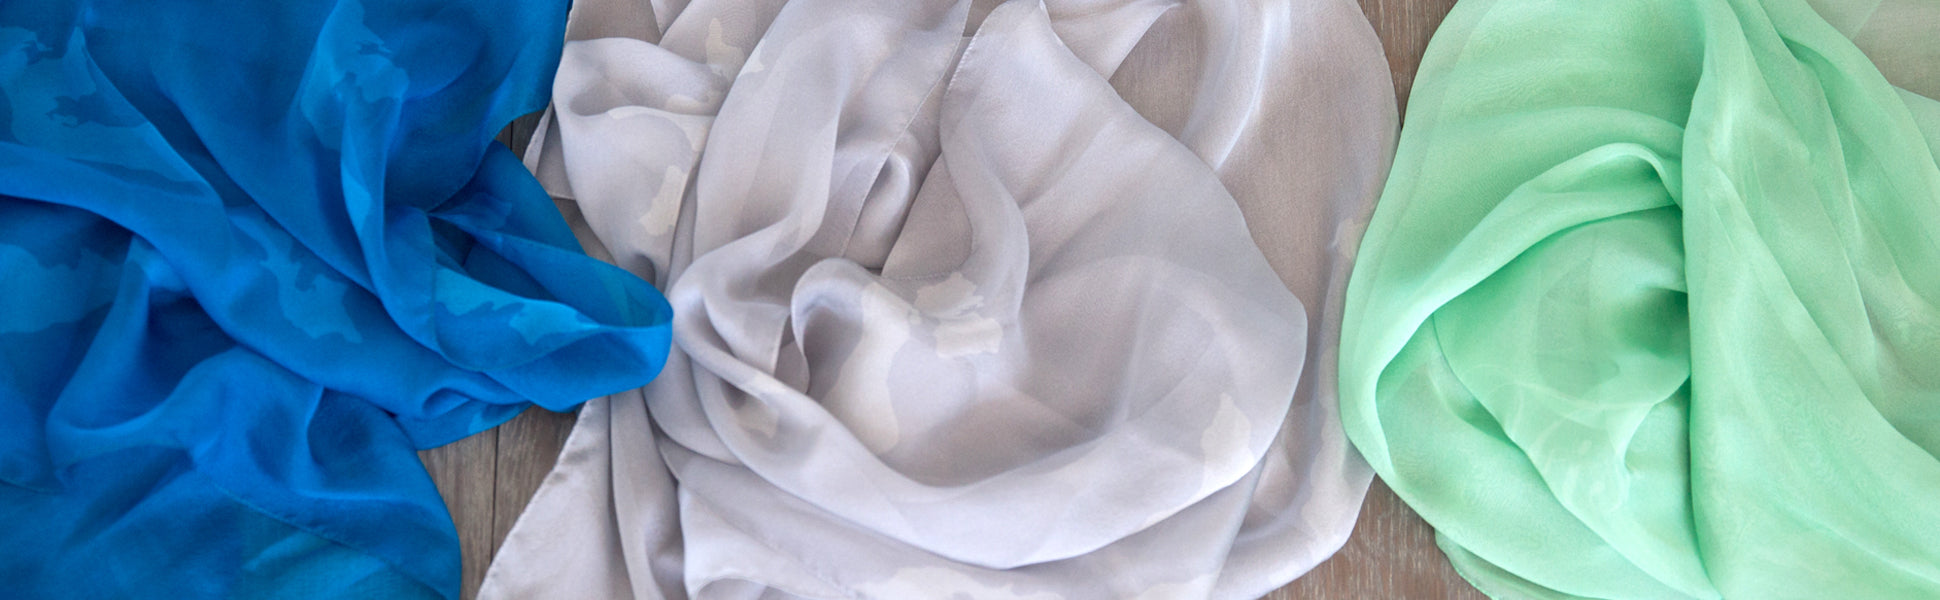 How To Care For and Wash Silk